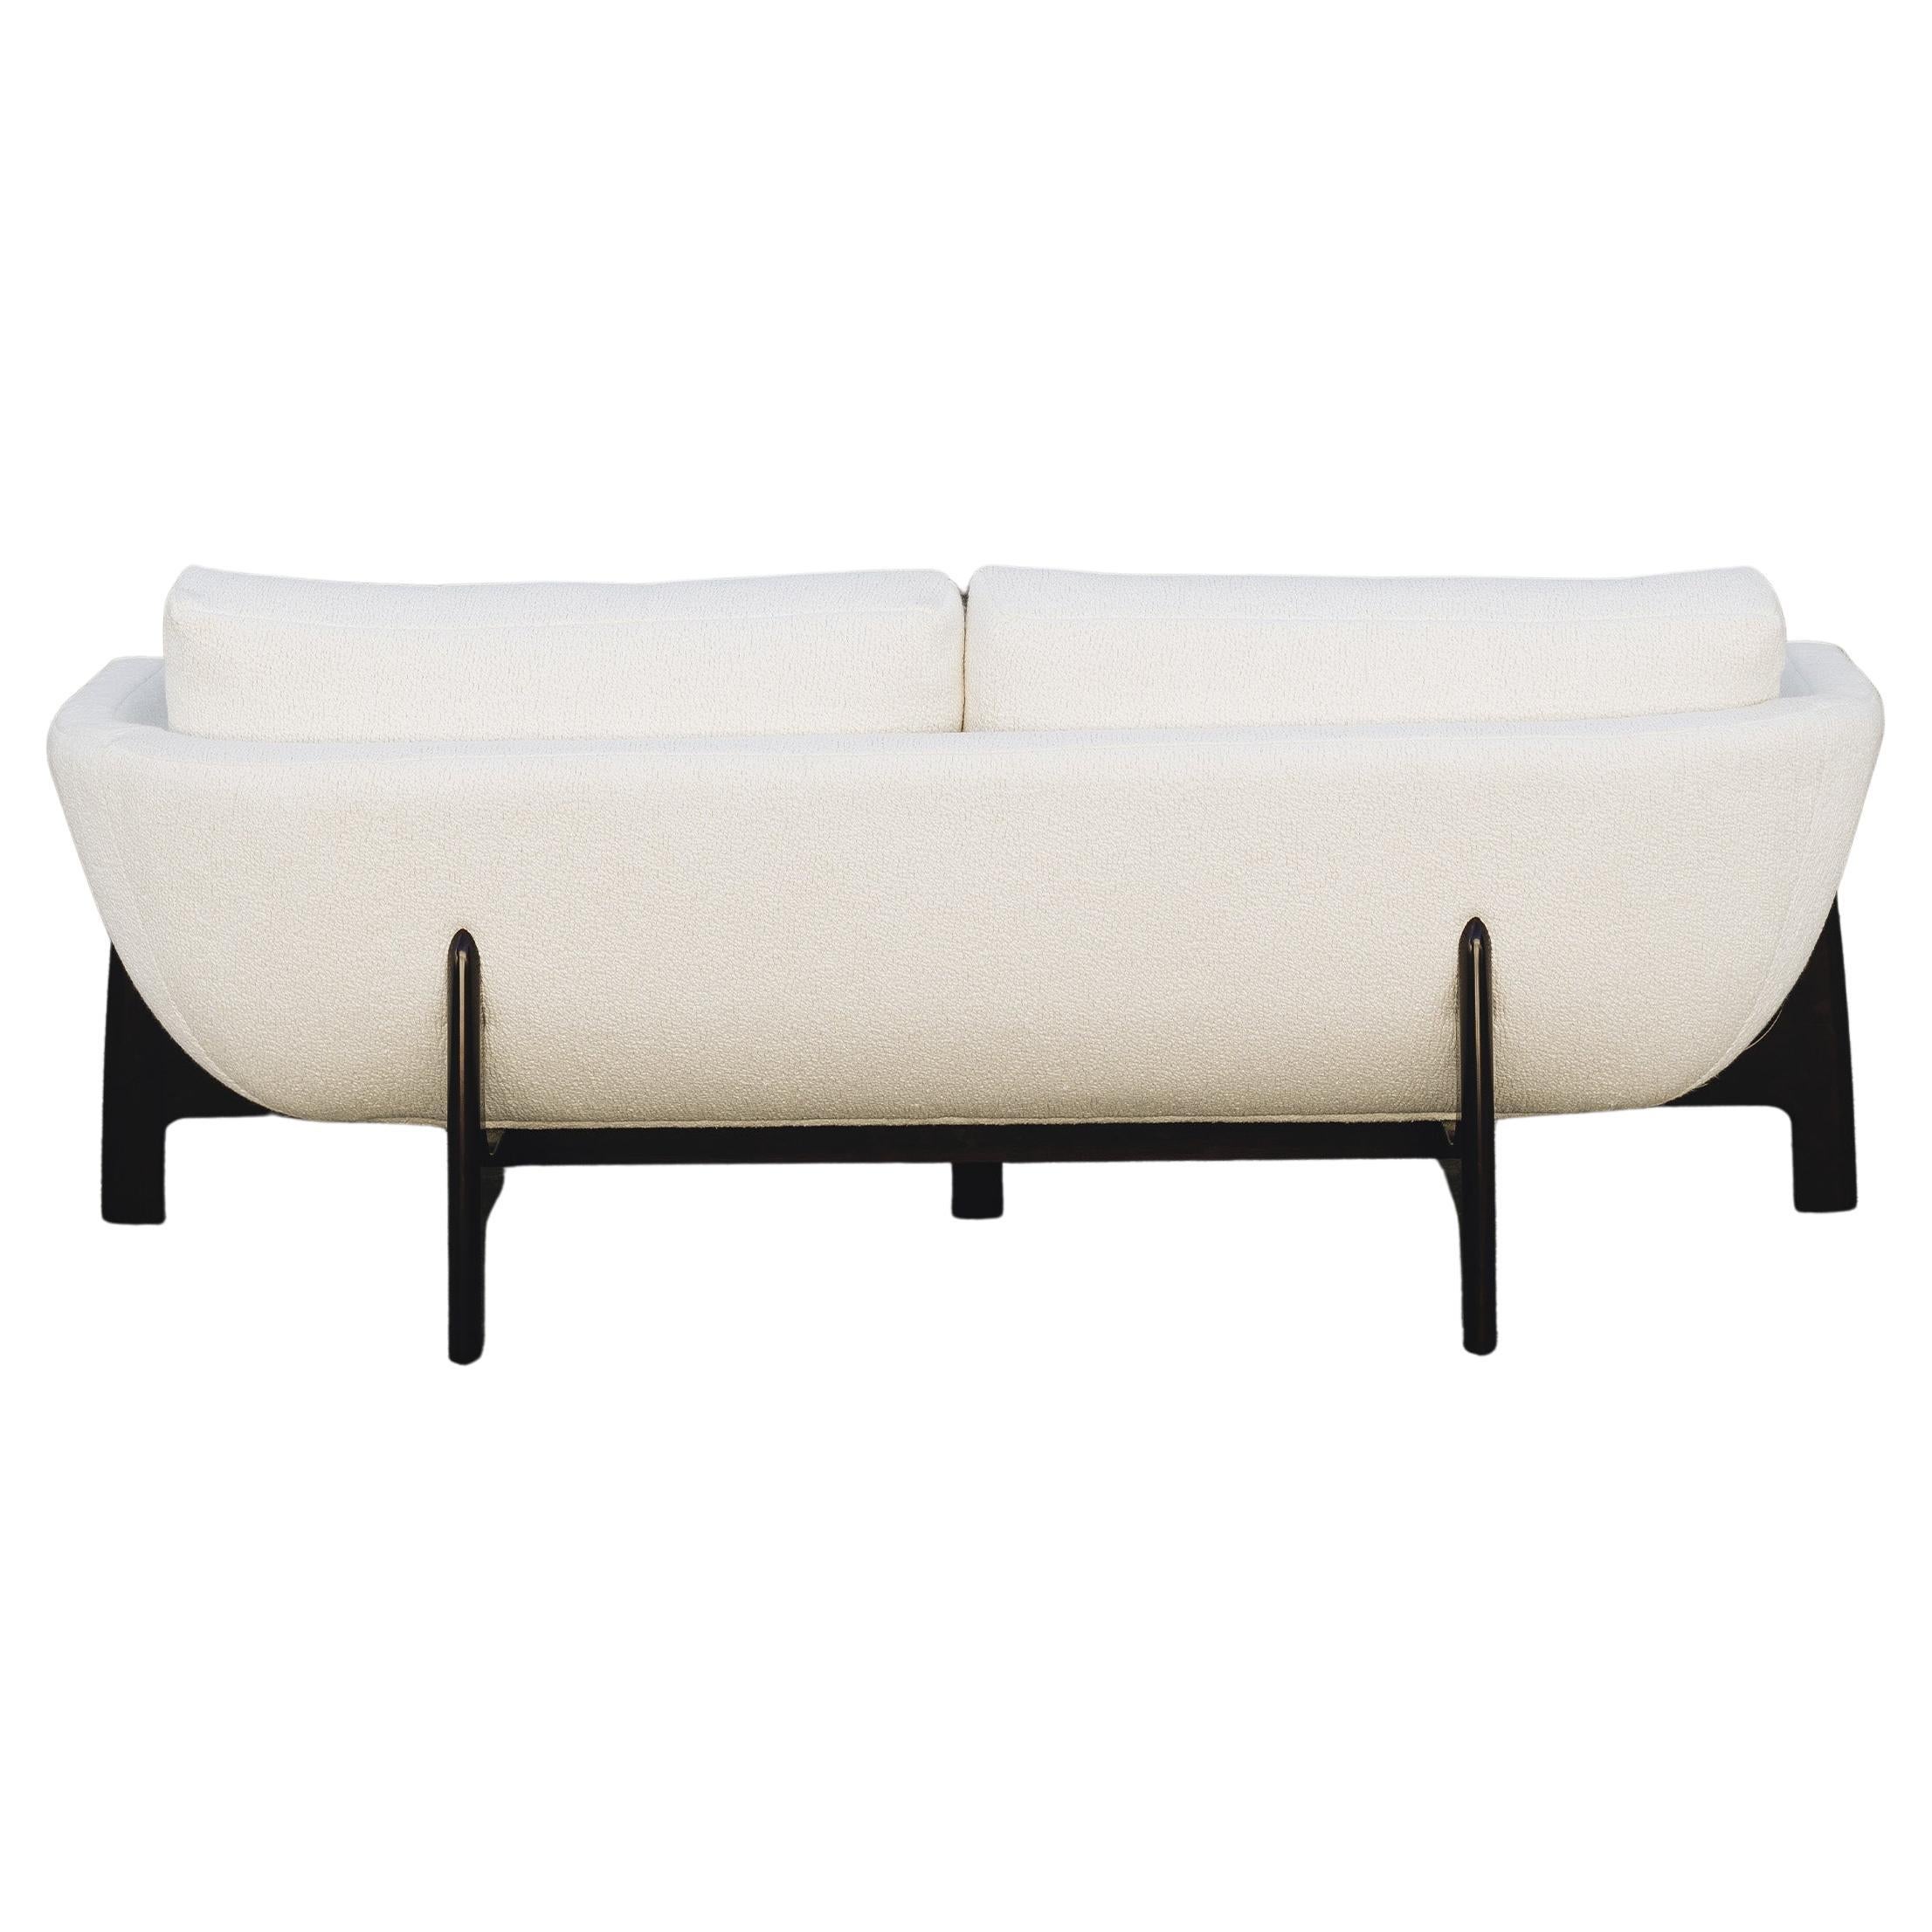 Oscar Wood Sofa, in Satin Mahogany Wood, Handcrafted in Portugal by Duistt